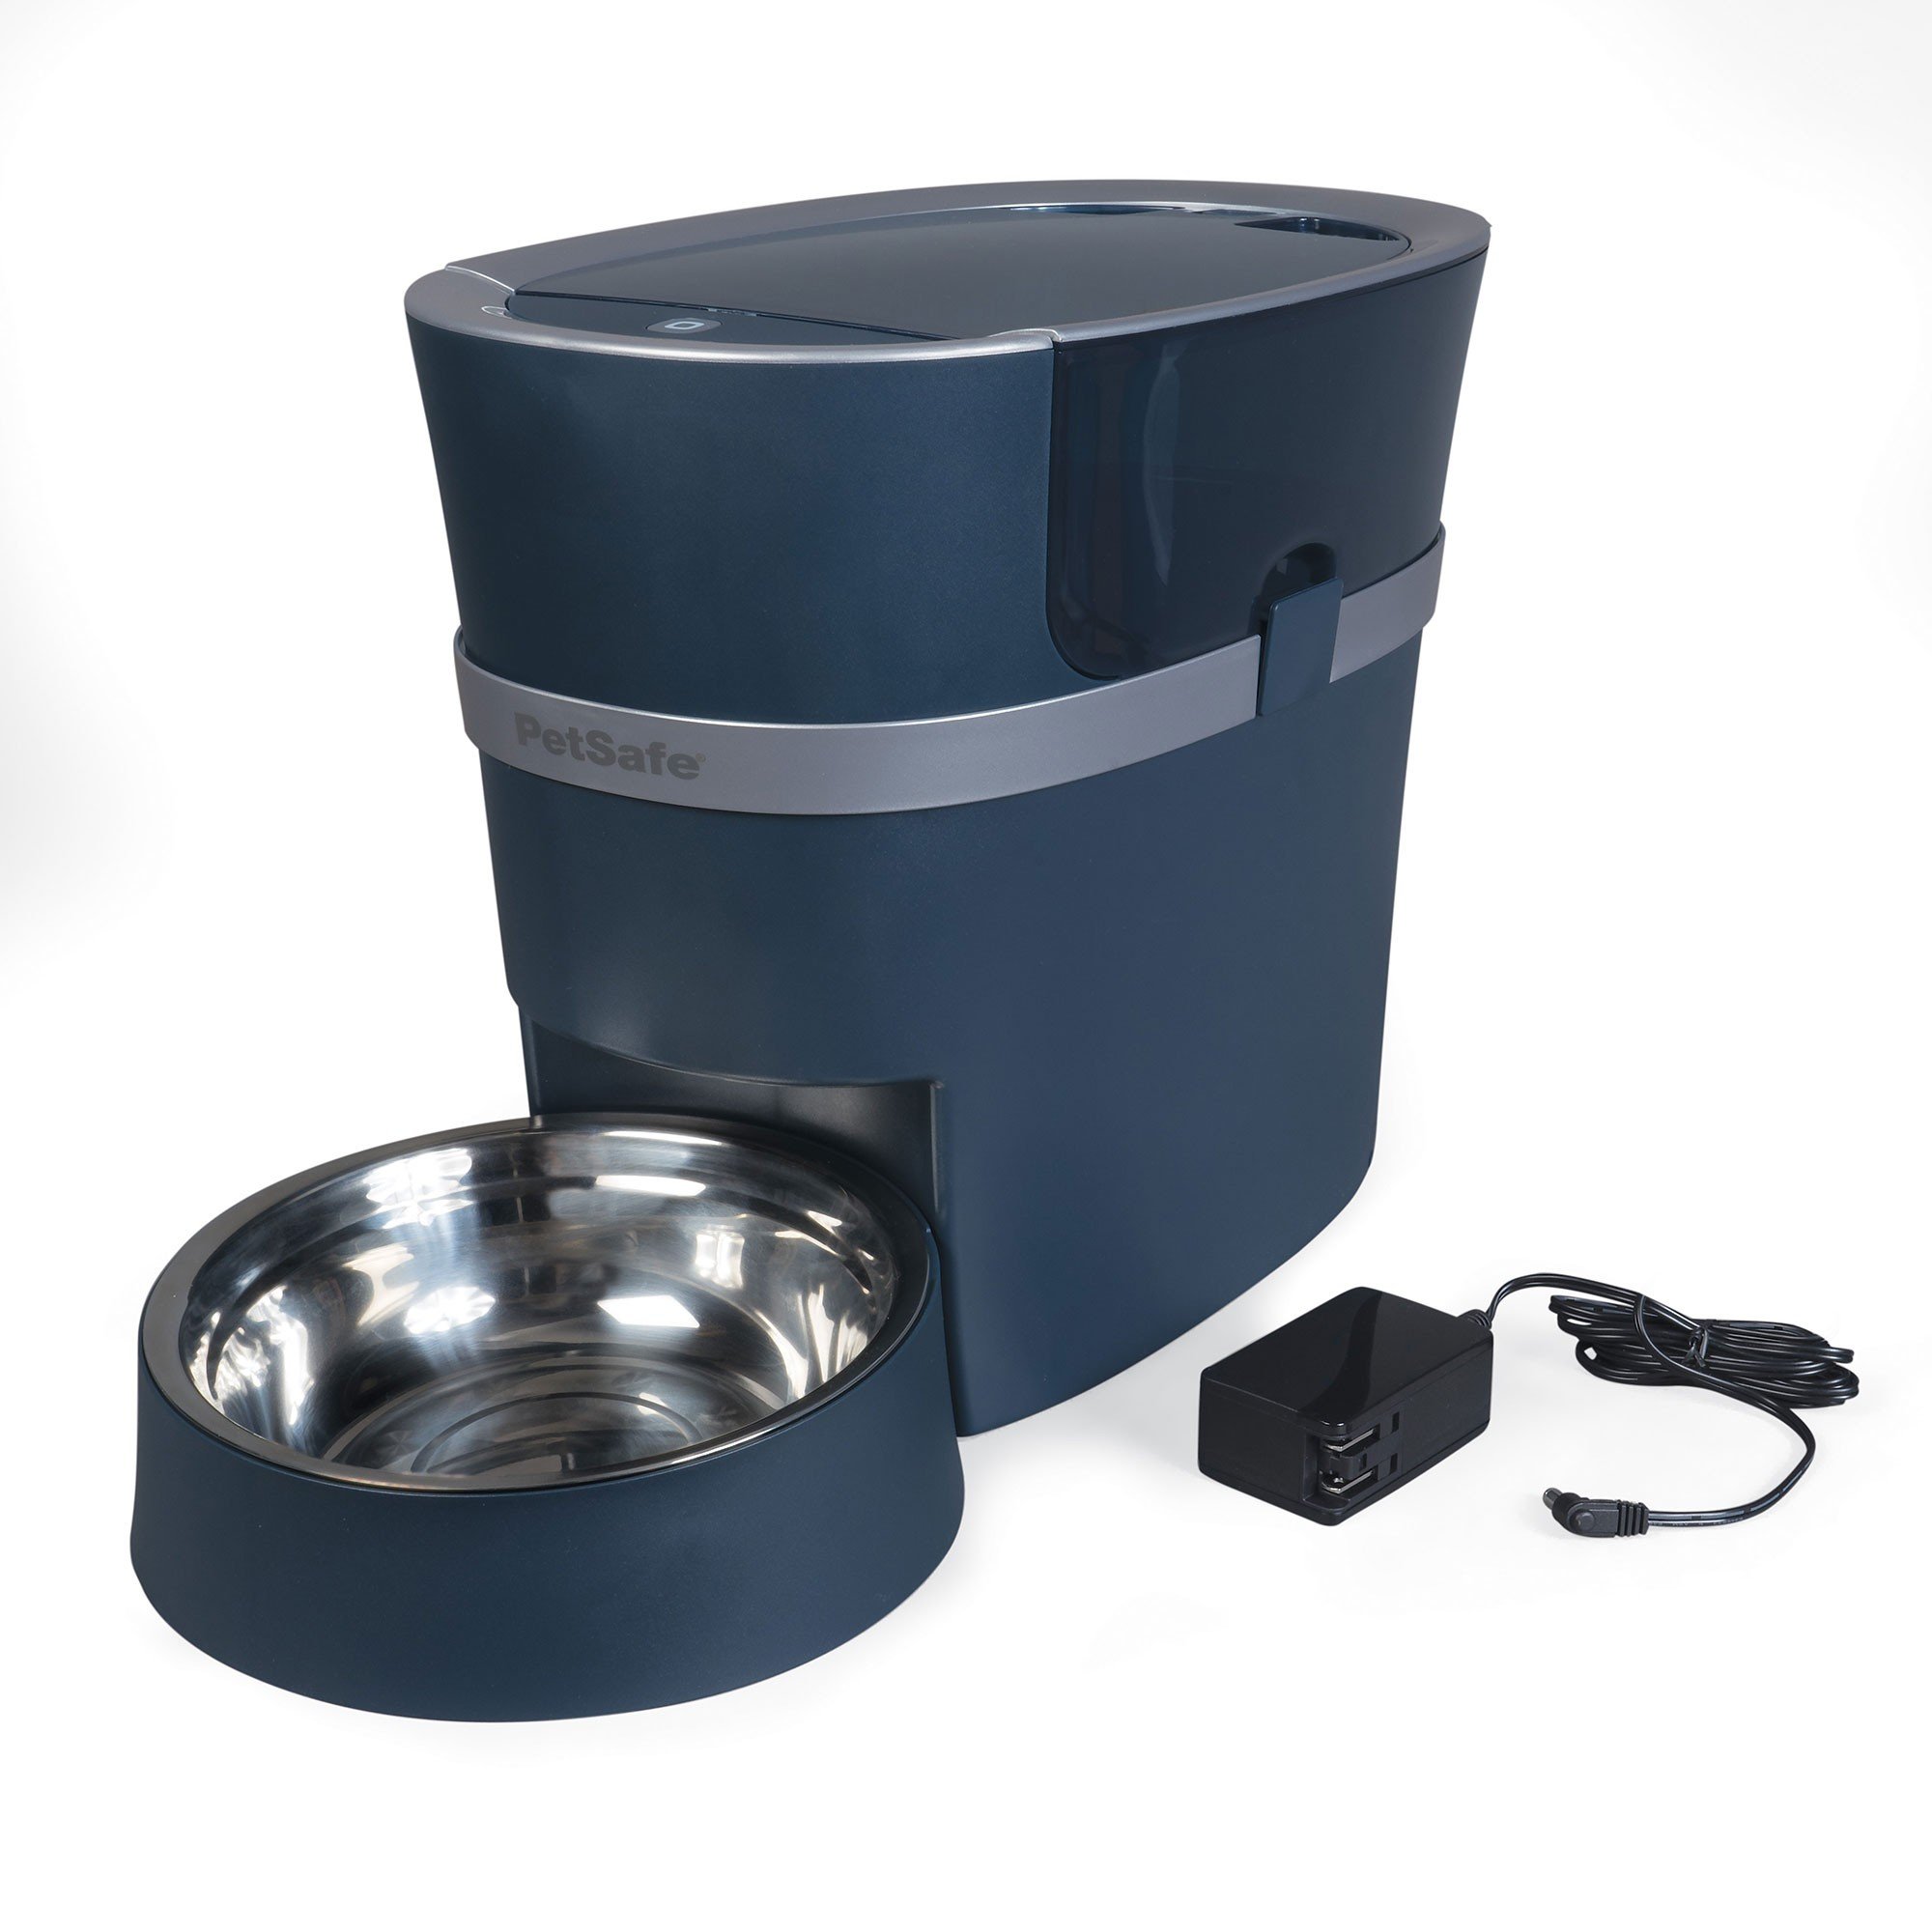 A photo of the Automatic cat feeder that we use